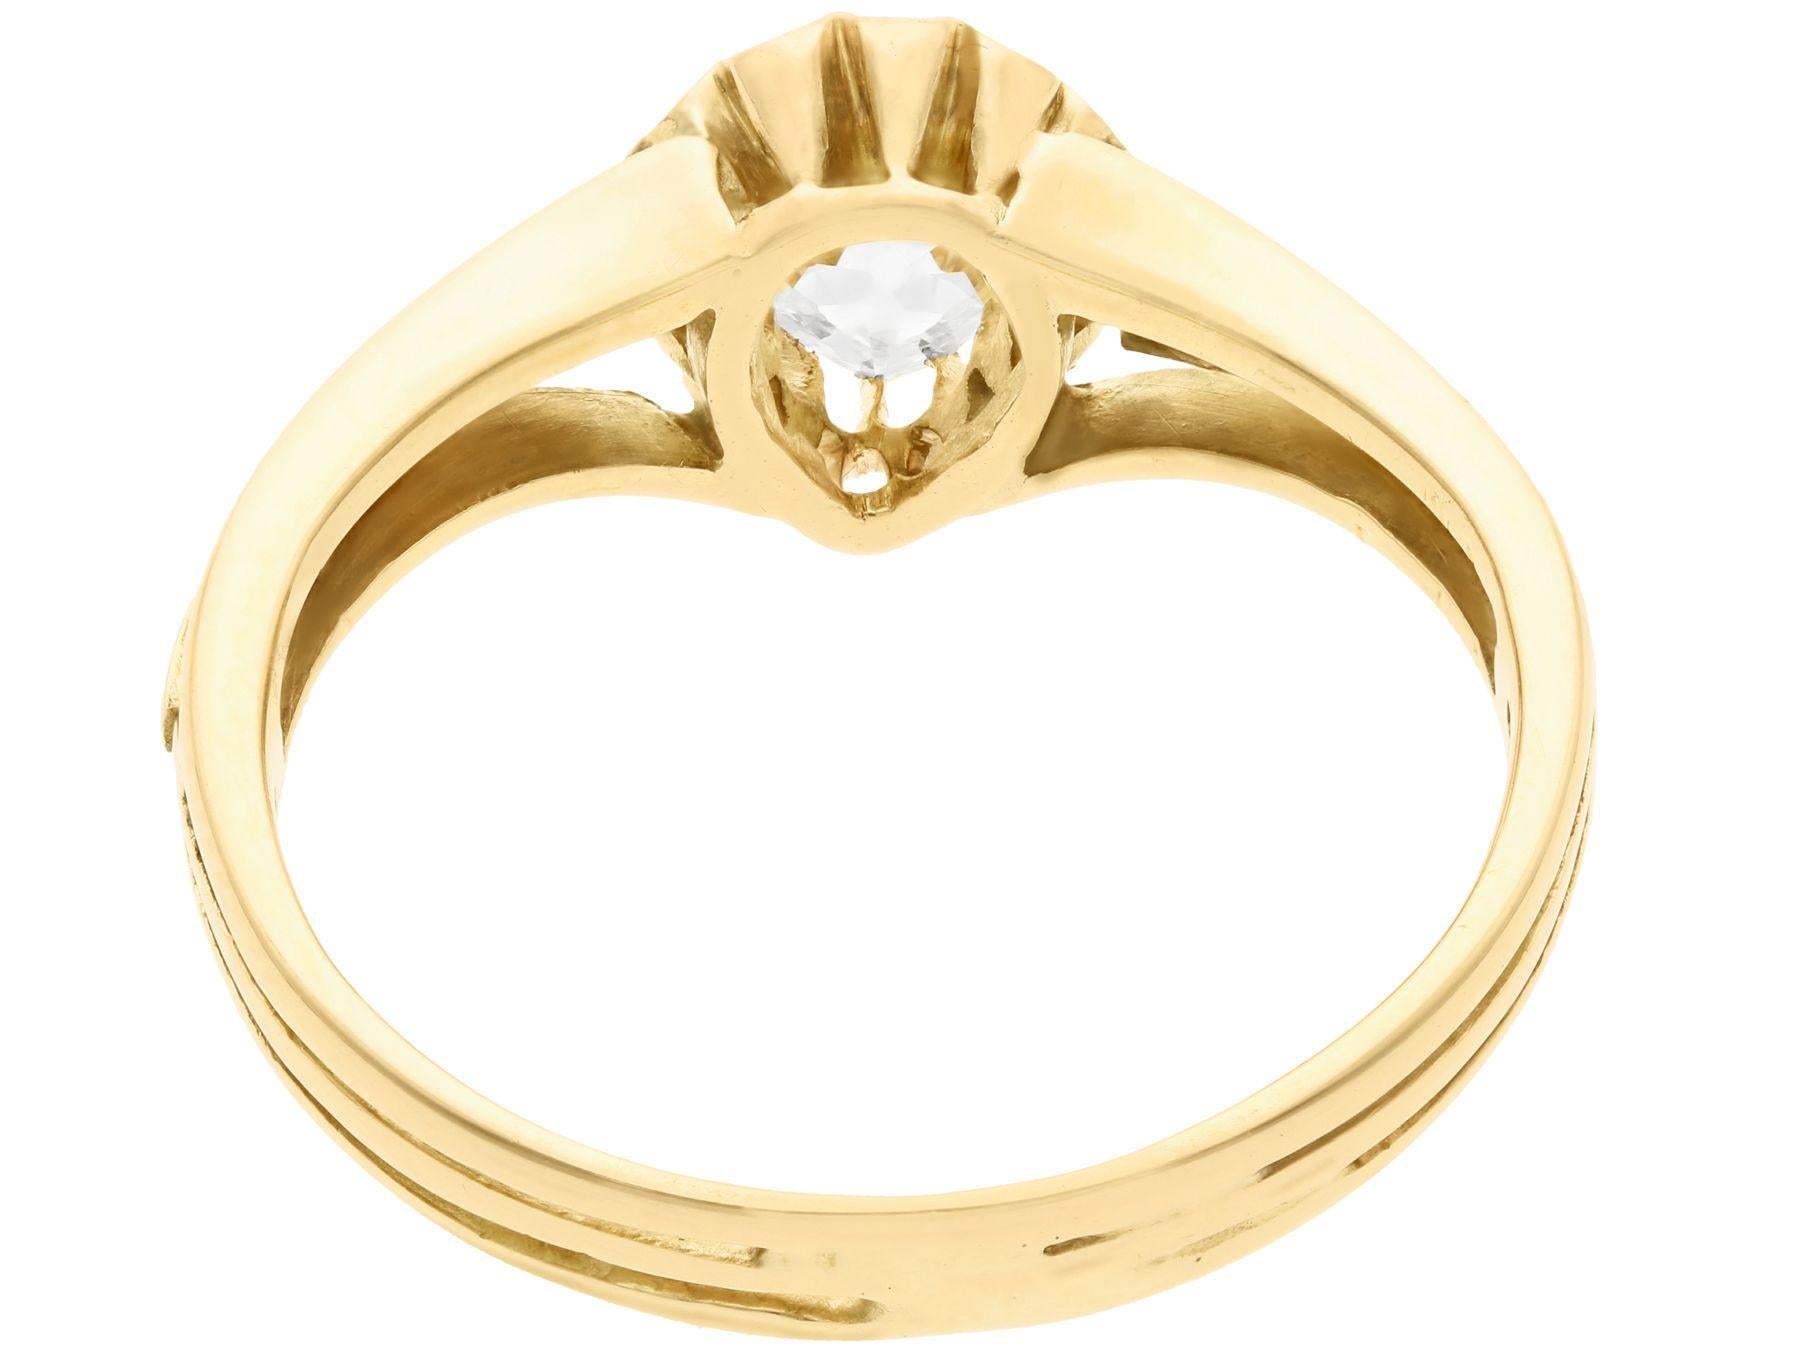 Antique Victorian Pear Cut Diamond and Yellow Gold Solitaire Engagement Ring In Excellent Condition For Sale In Jesmond, Newcastle Upon Tyne